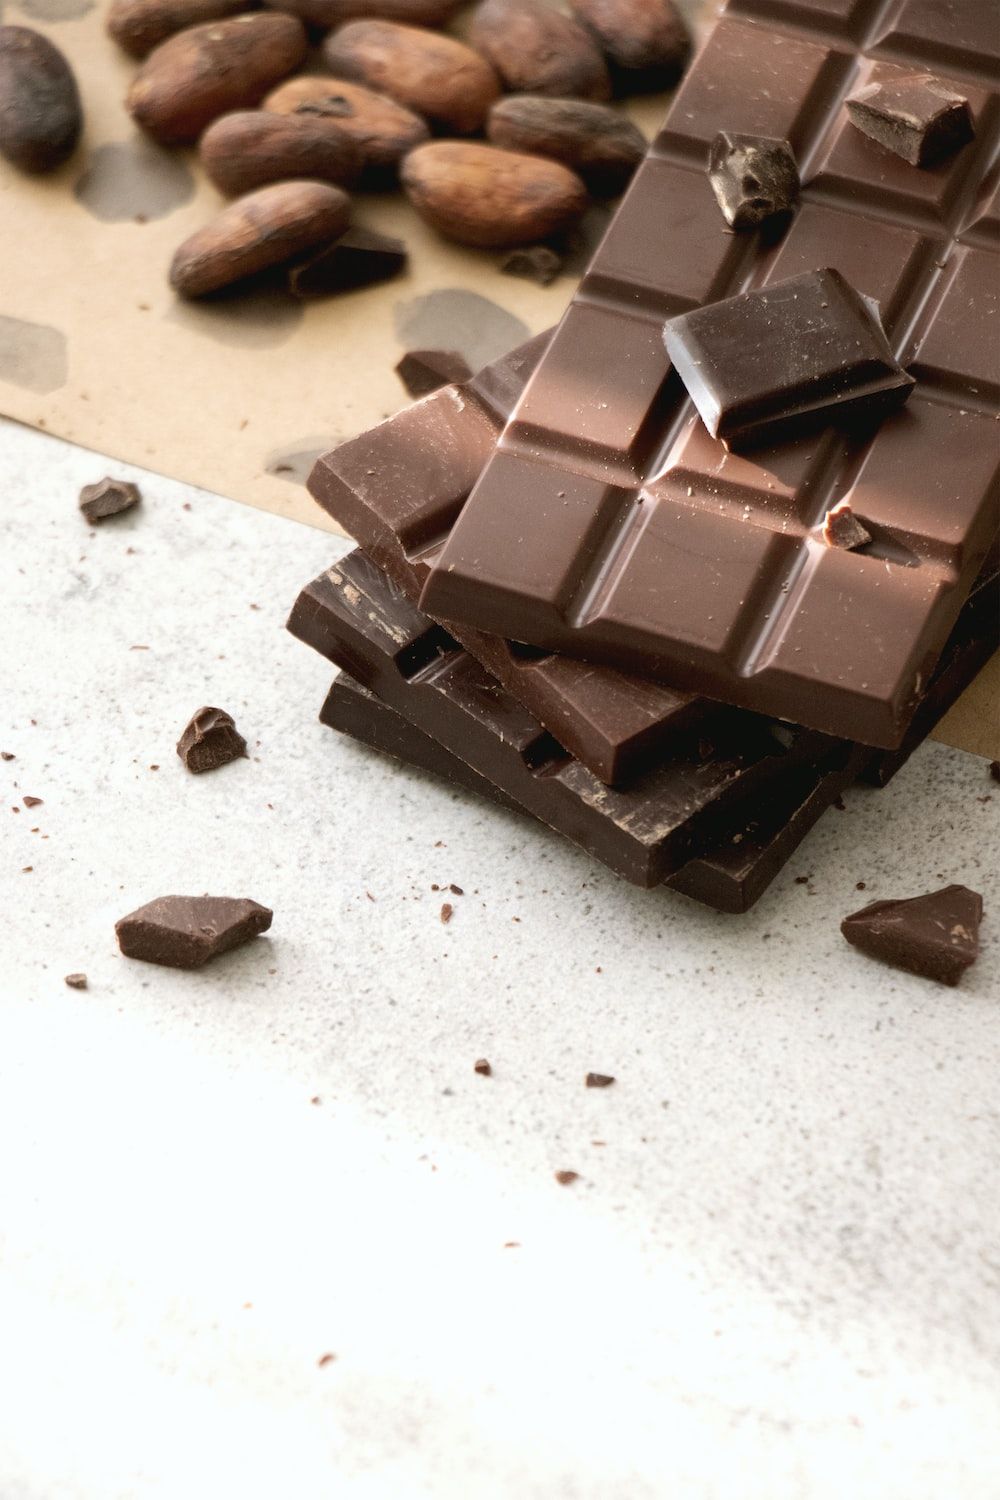 Dark chocolate bars with cocoa beans on a table - Chocolate